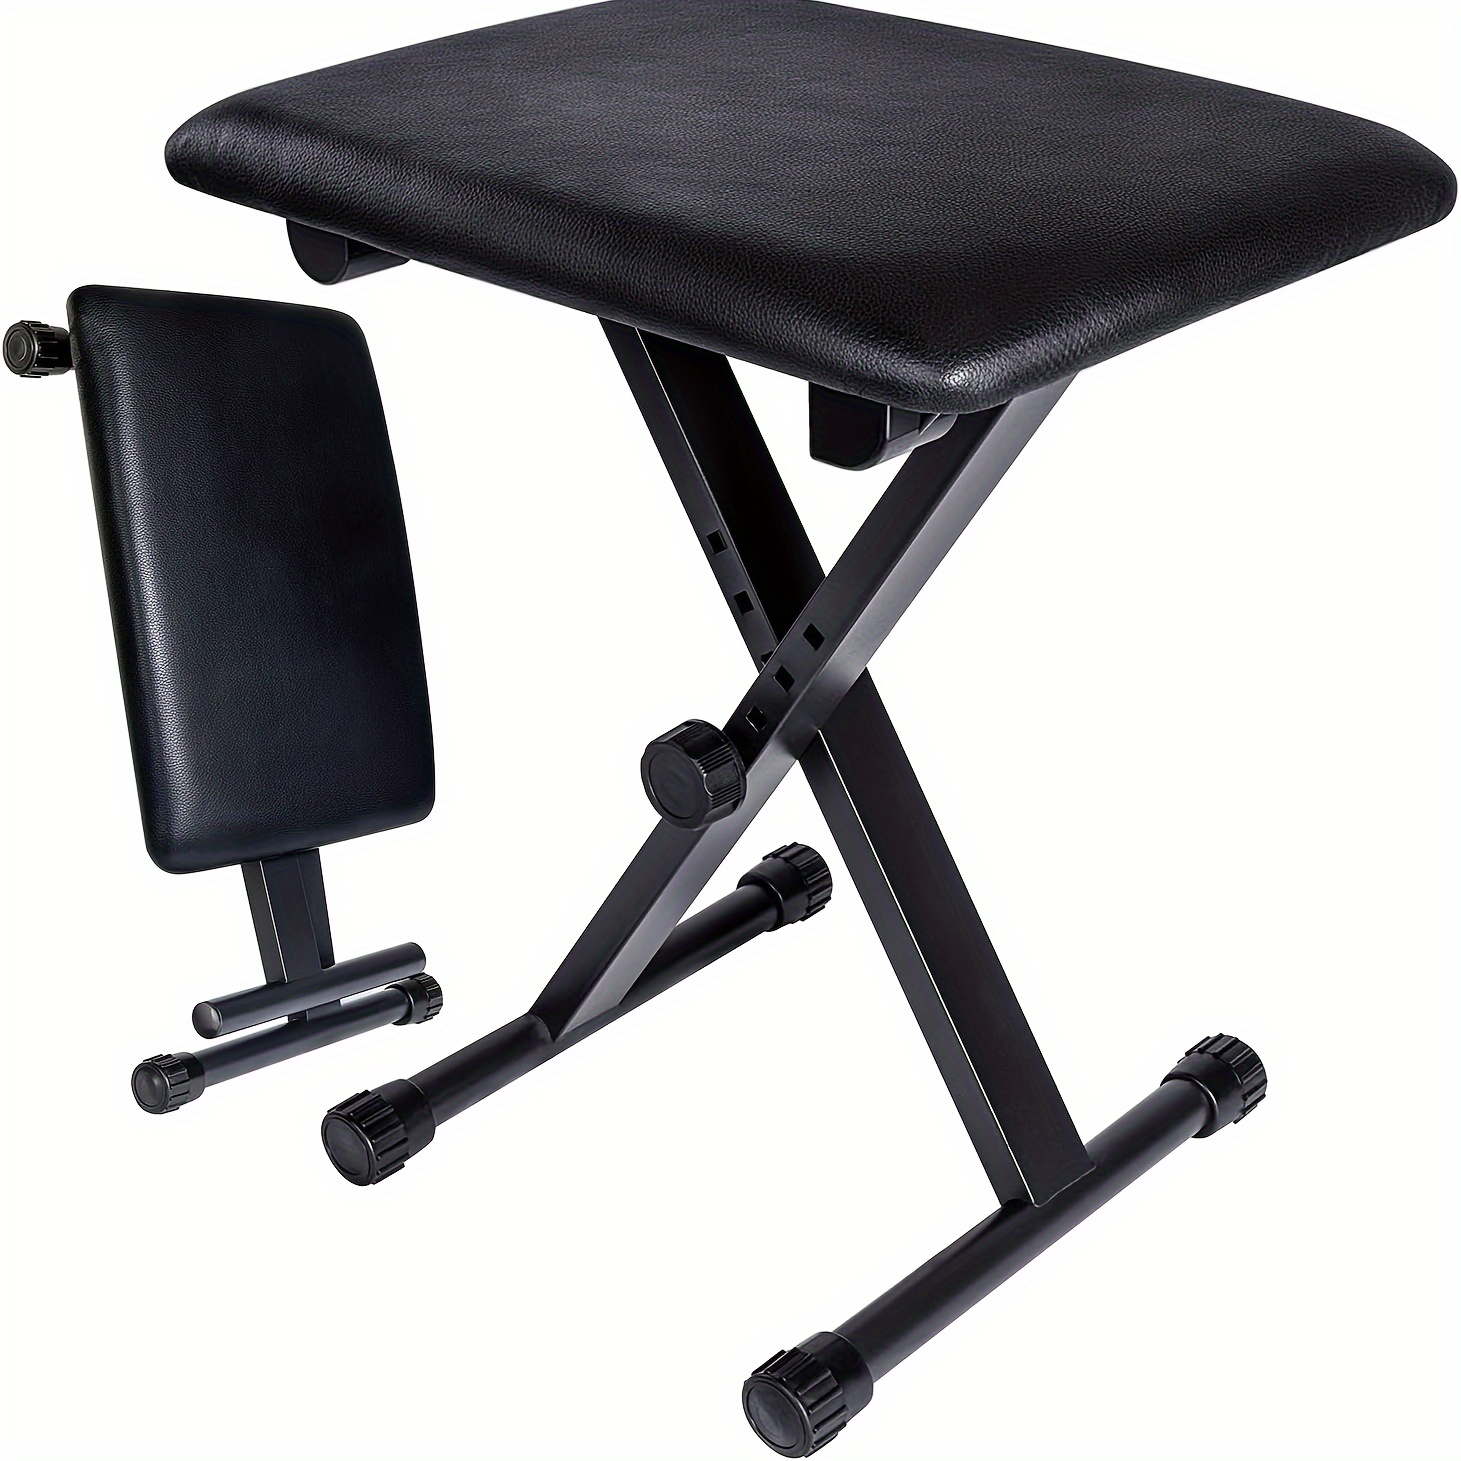 

keyboard Bench Adjustable, X-style Portable Bench Seat For Electronic Padded Keyboards Stool & Padded Folding Pianos Chair (black)